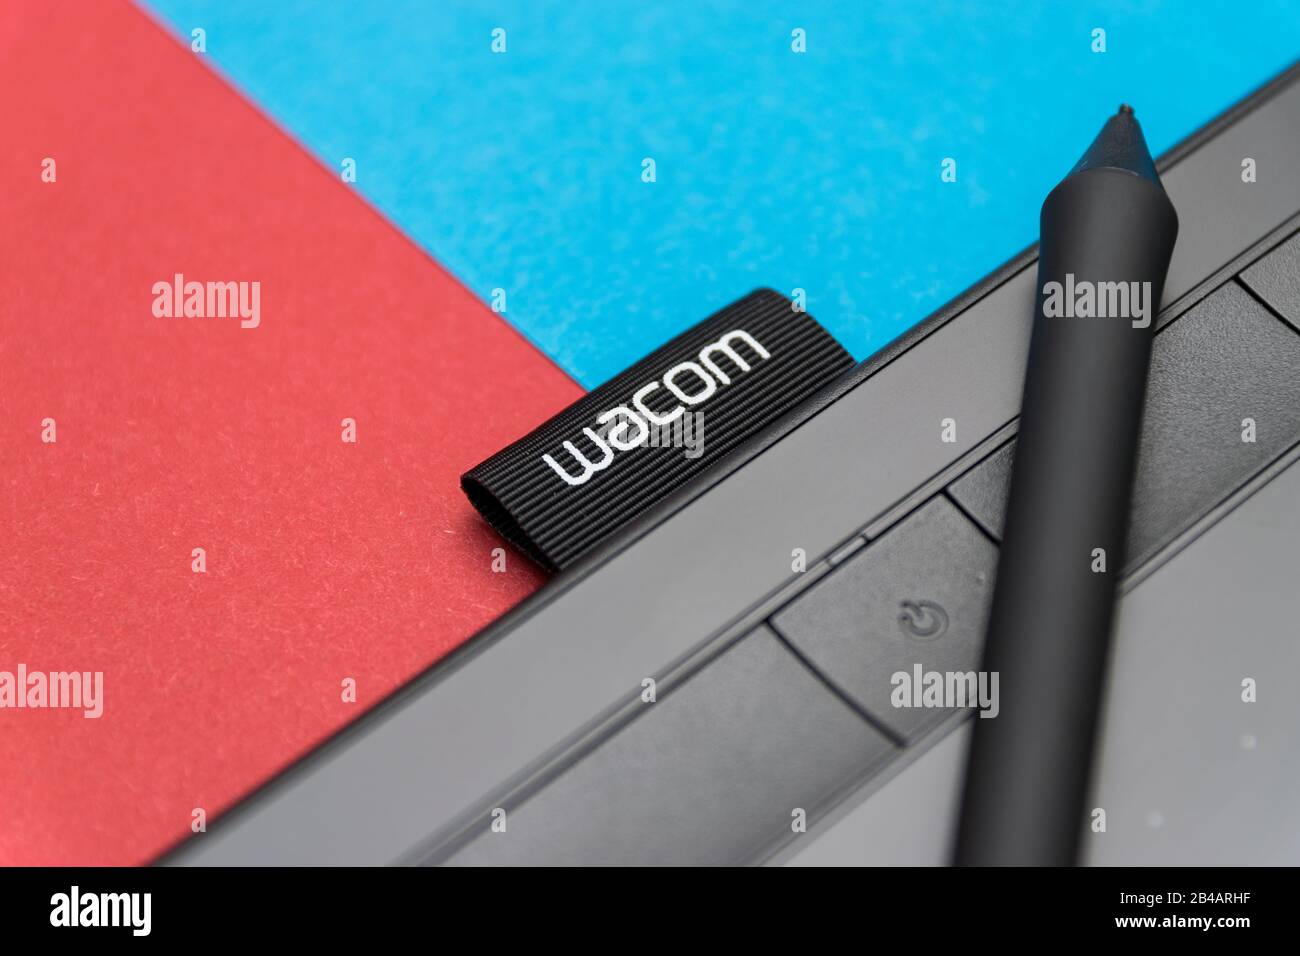 CLUJ, ROMANIA - NOV 08, 2019: Wacom brand illustrative editorial. Wacom is a Japanese company headquartered in Japan, that specializes in graphics tab Stock Photo